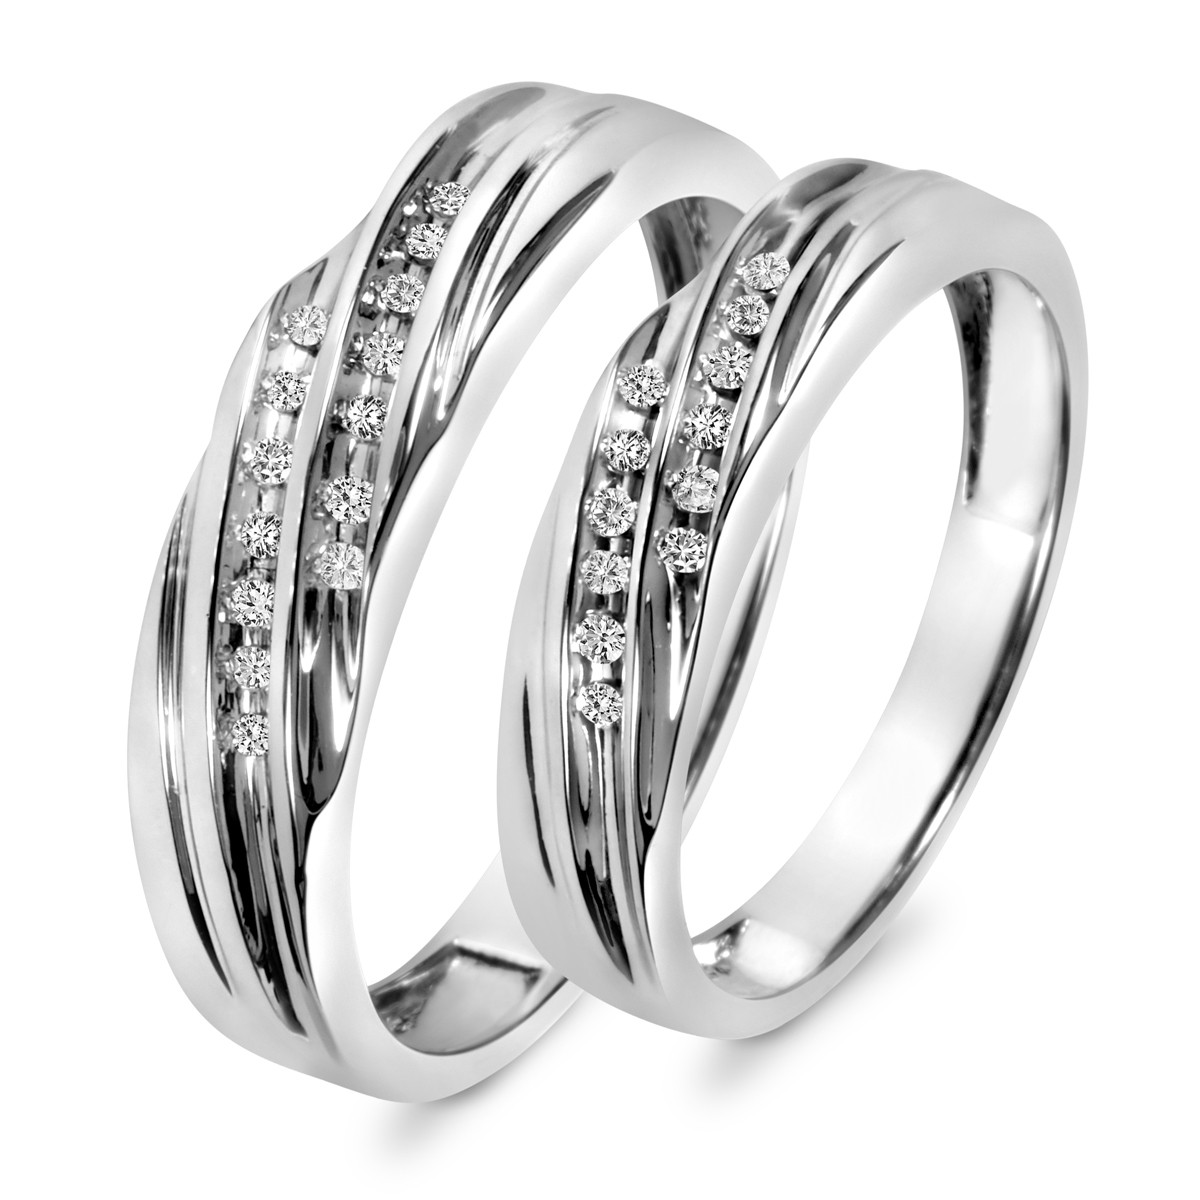 White Gold Wedding Ring Sets His And Hers
 1 1 7 Carat T W Diamond His And Hers Wedding Band Set 10K